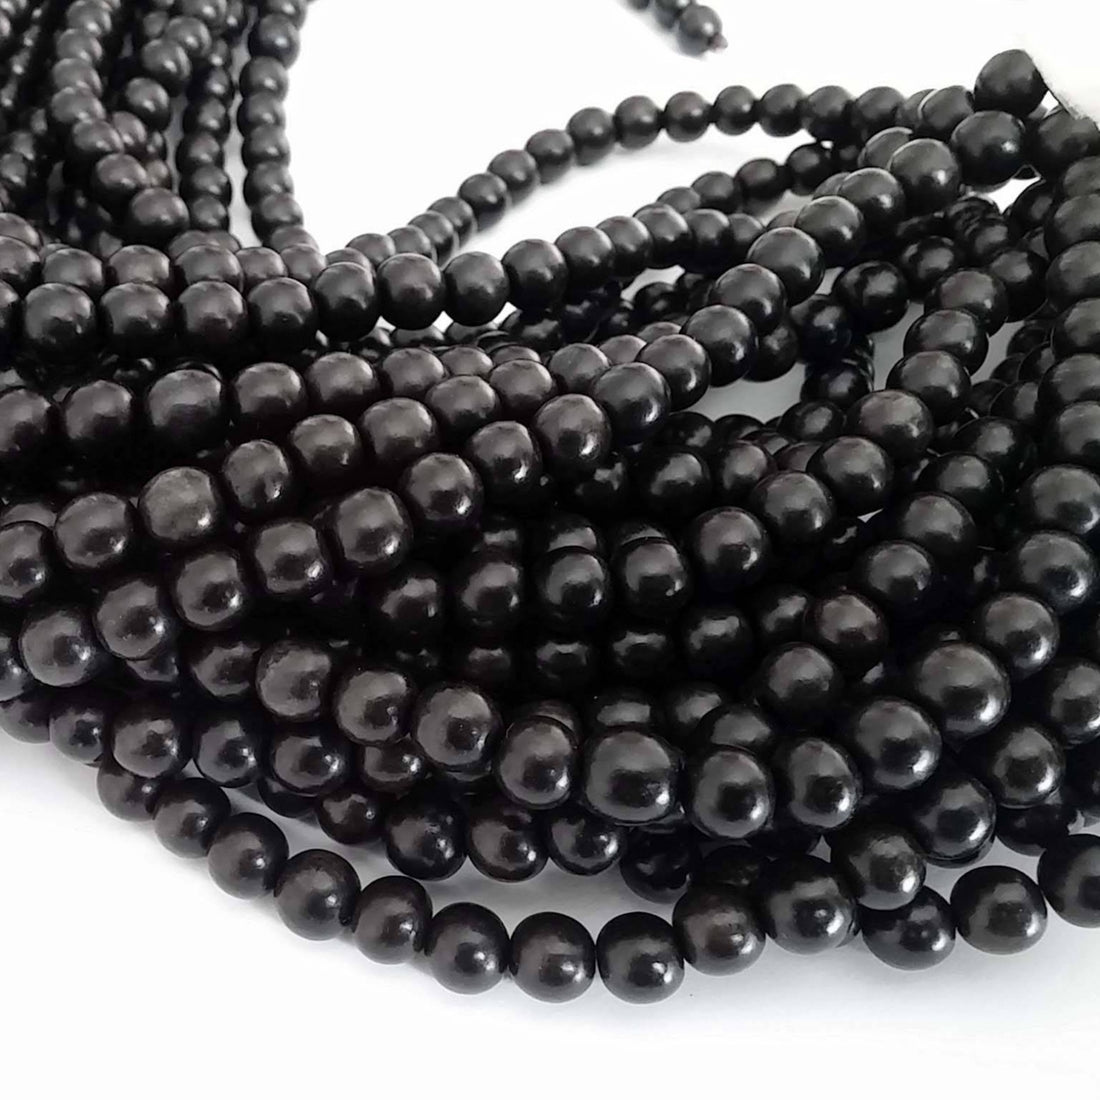 Exotic Black Kamagong wood round beads - Wooden Beads 6 or 8mm